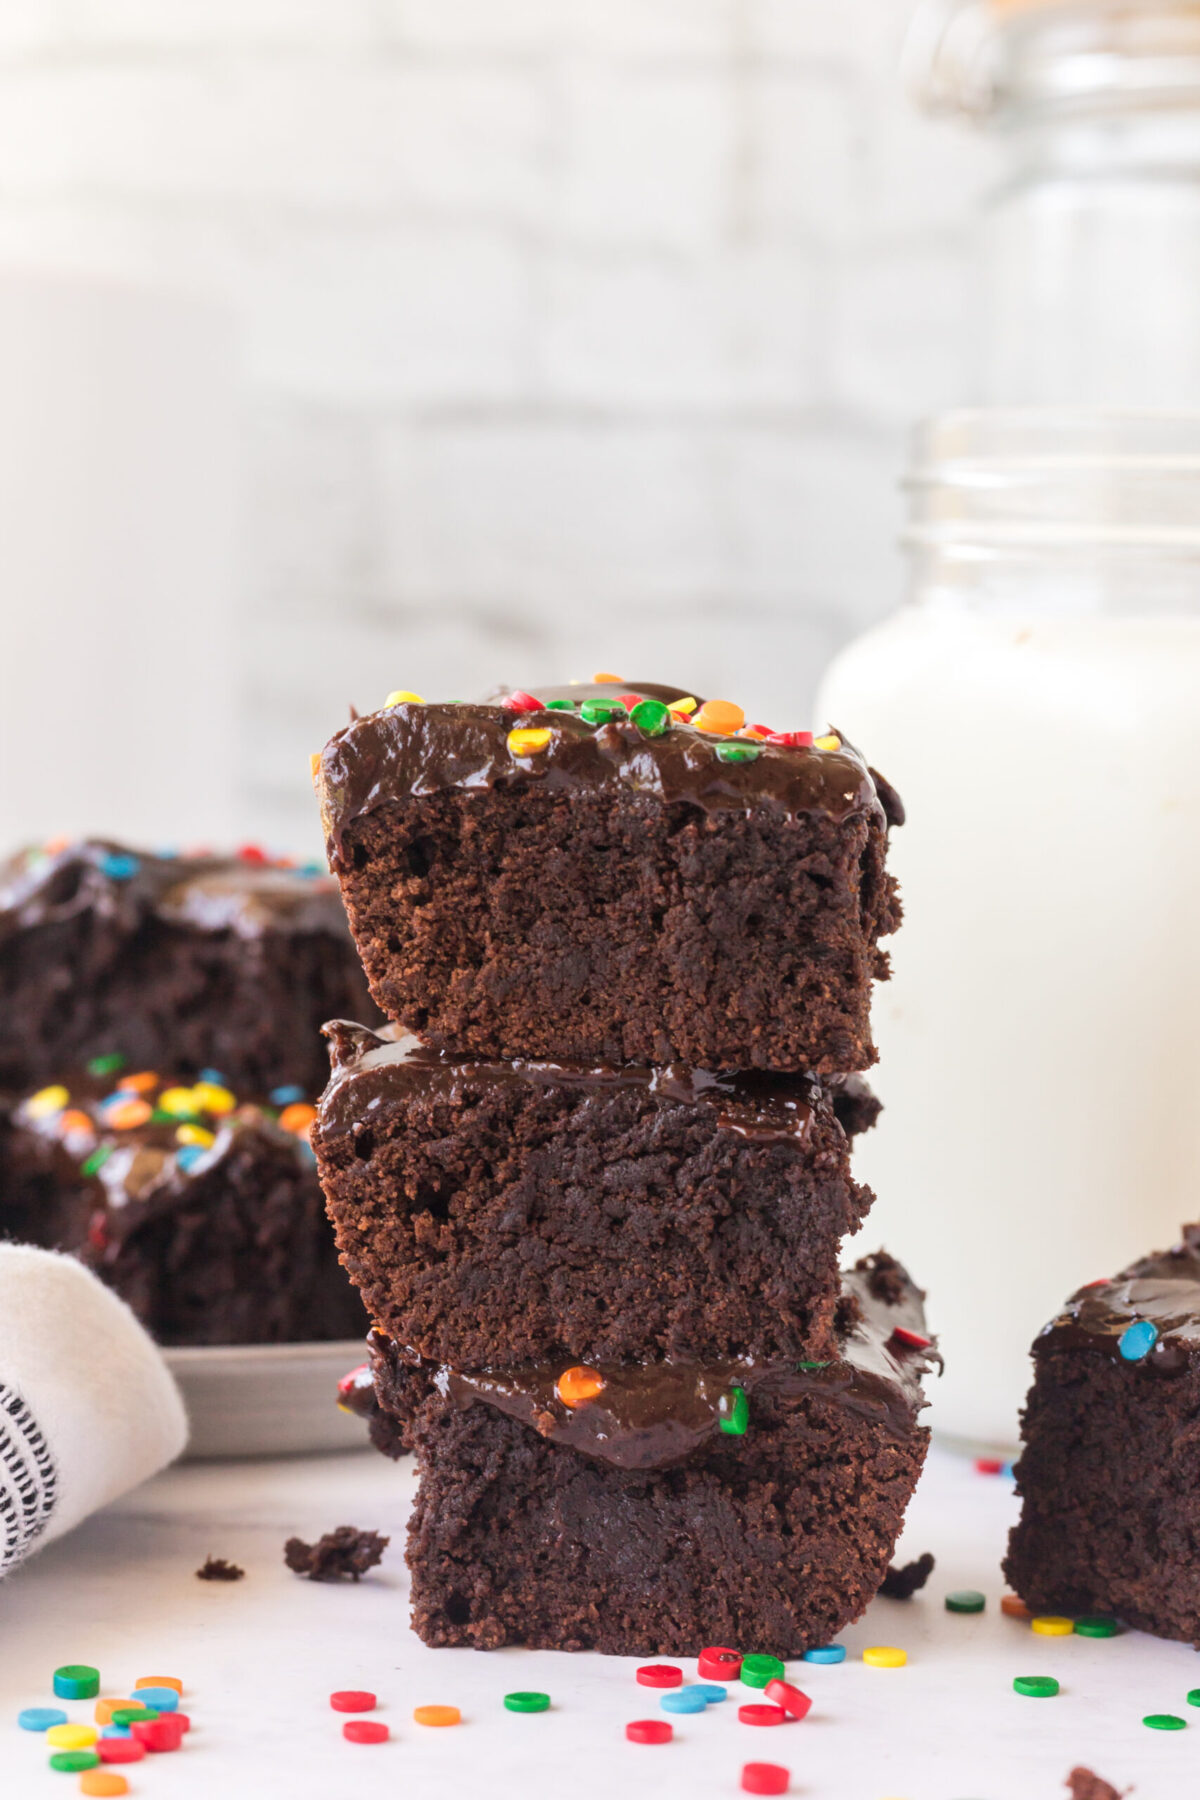 stack of 3 cosmic brownies recipe in the middle, milk jug back right, brownies on a plate back left. rainbow sprinkles on surface. white brick background, white surface.